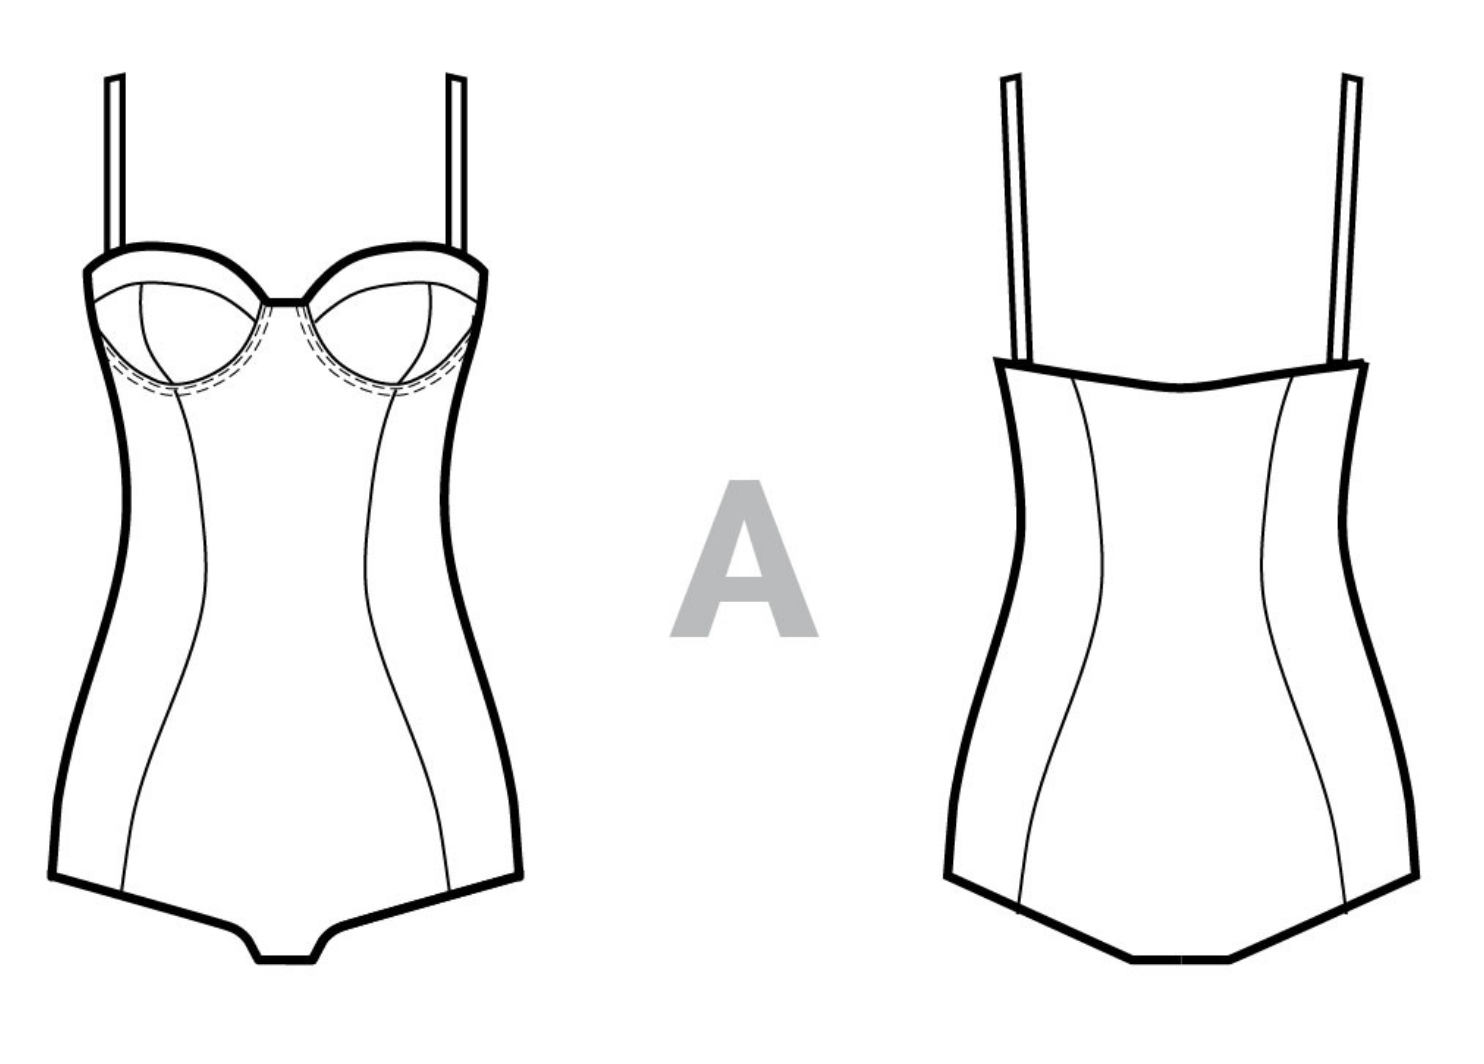 Swimsuit Patterns — Masson LifeStyle - Sewing Traveling and Home